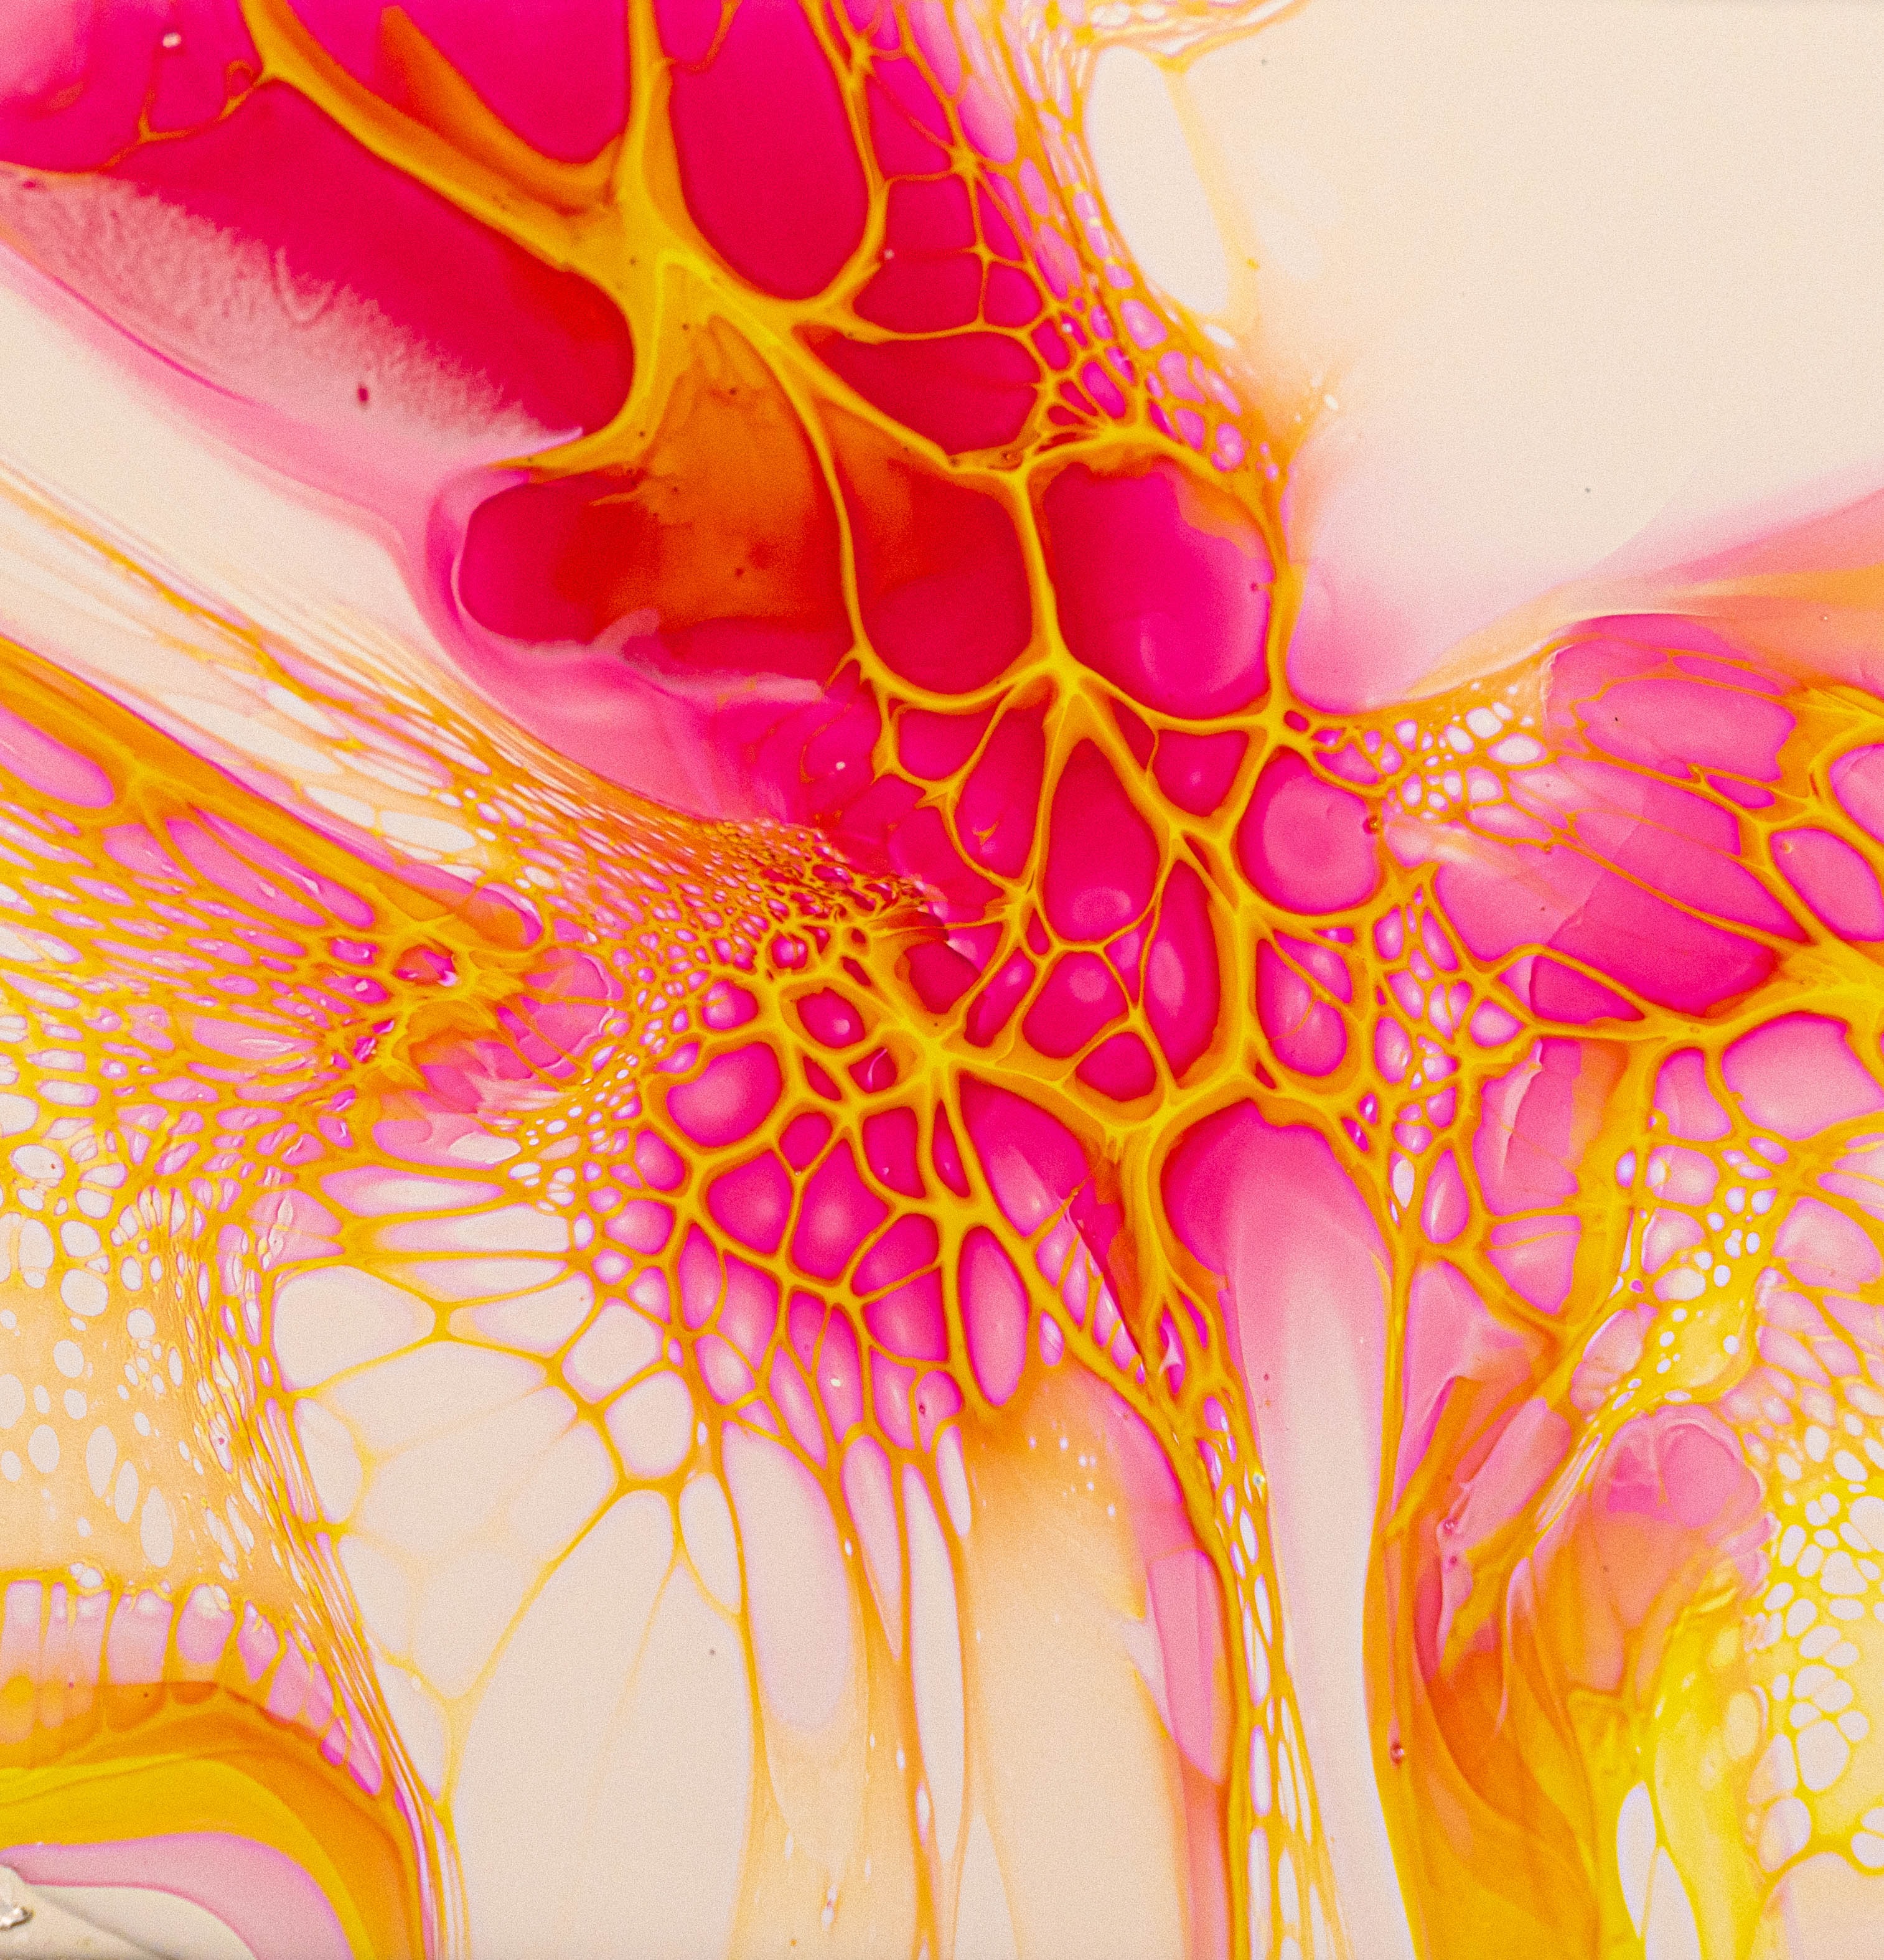 paint, abstract, pink, yellow, divorces, liquid 32K